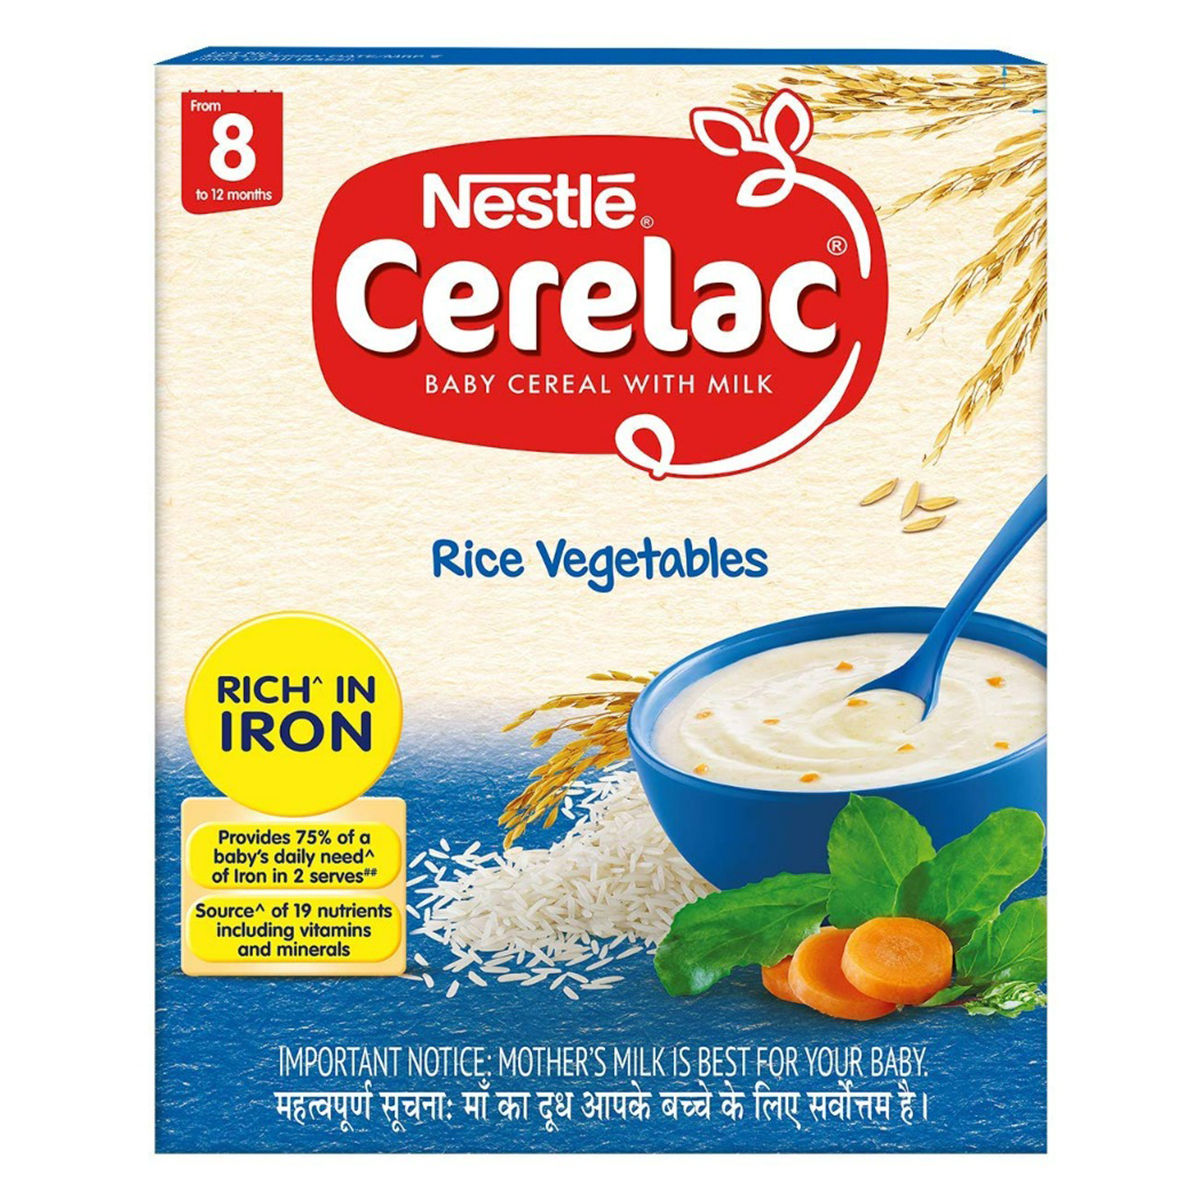 Buy Nestle Cerelac Baby Cereal with Milk Rice Vegetables (From 8 to 12 Months) Powder, 300 gm Refill Pack Online